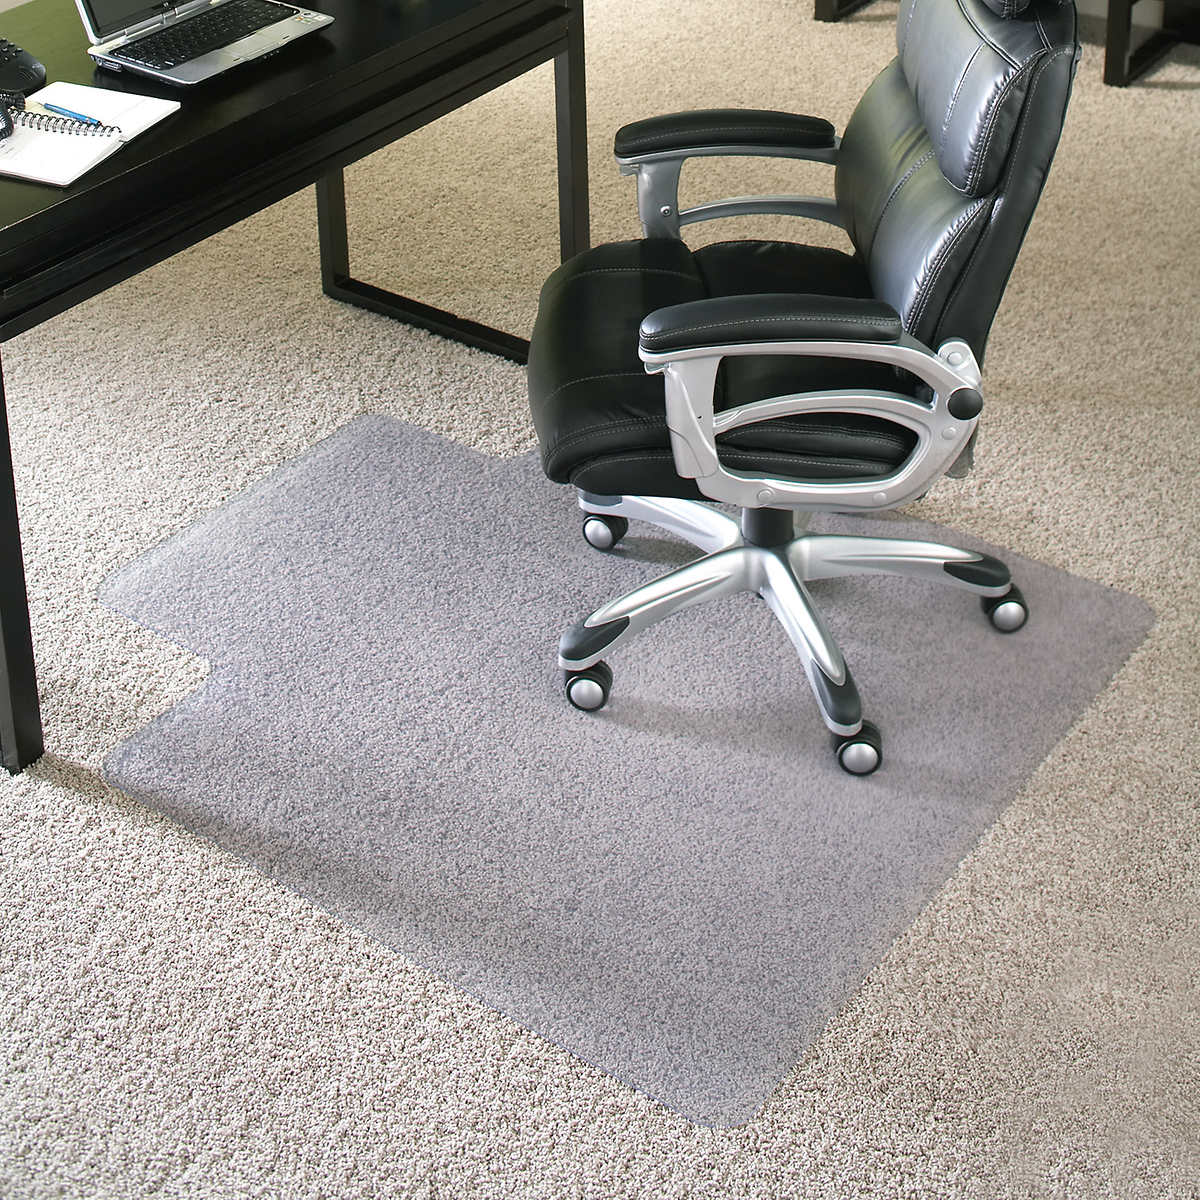 5+ Best Rug Under Office Chair [Reviewed in 2020]